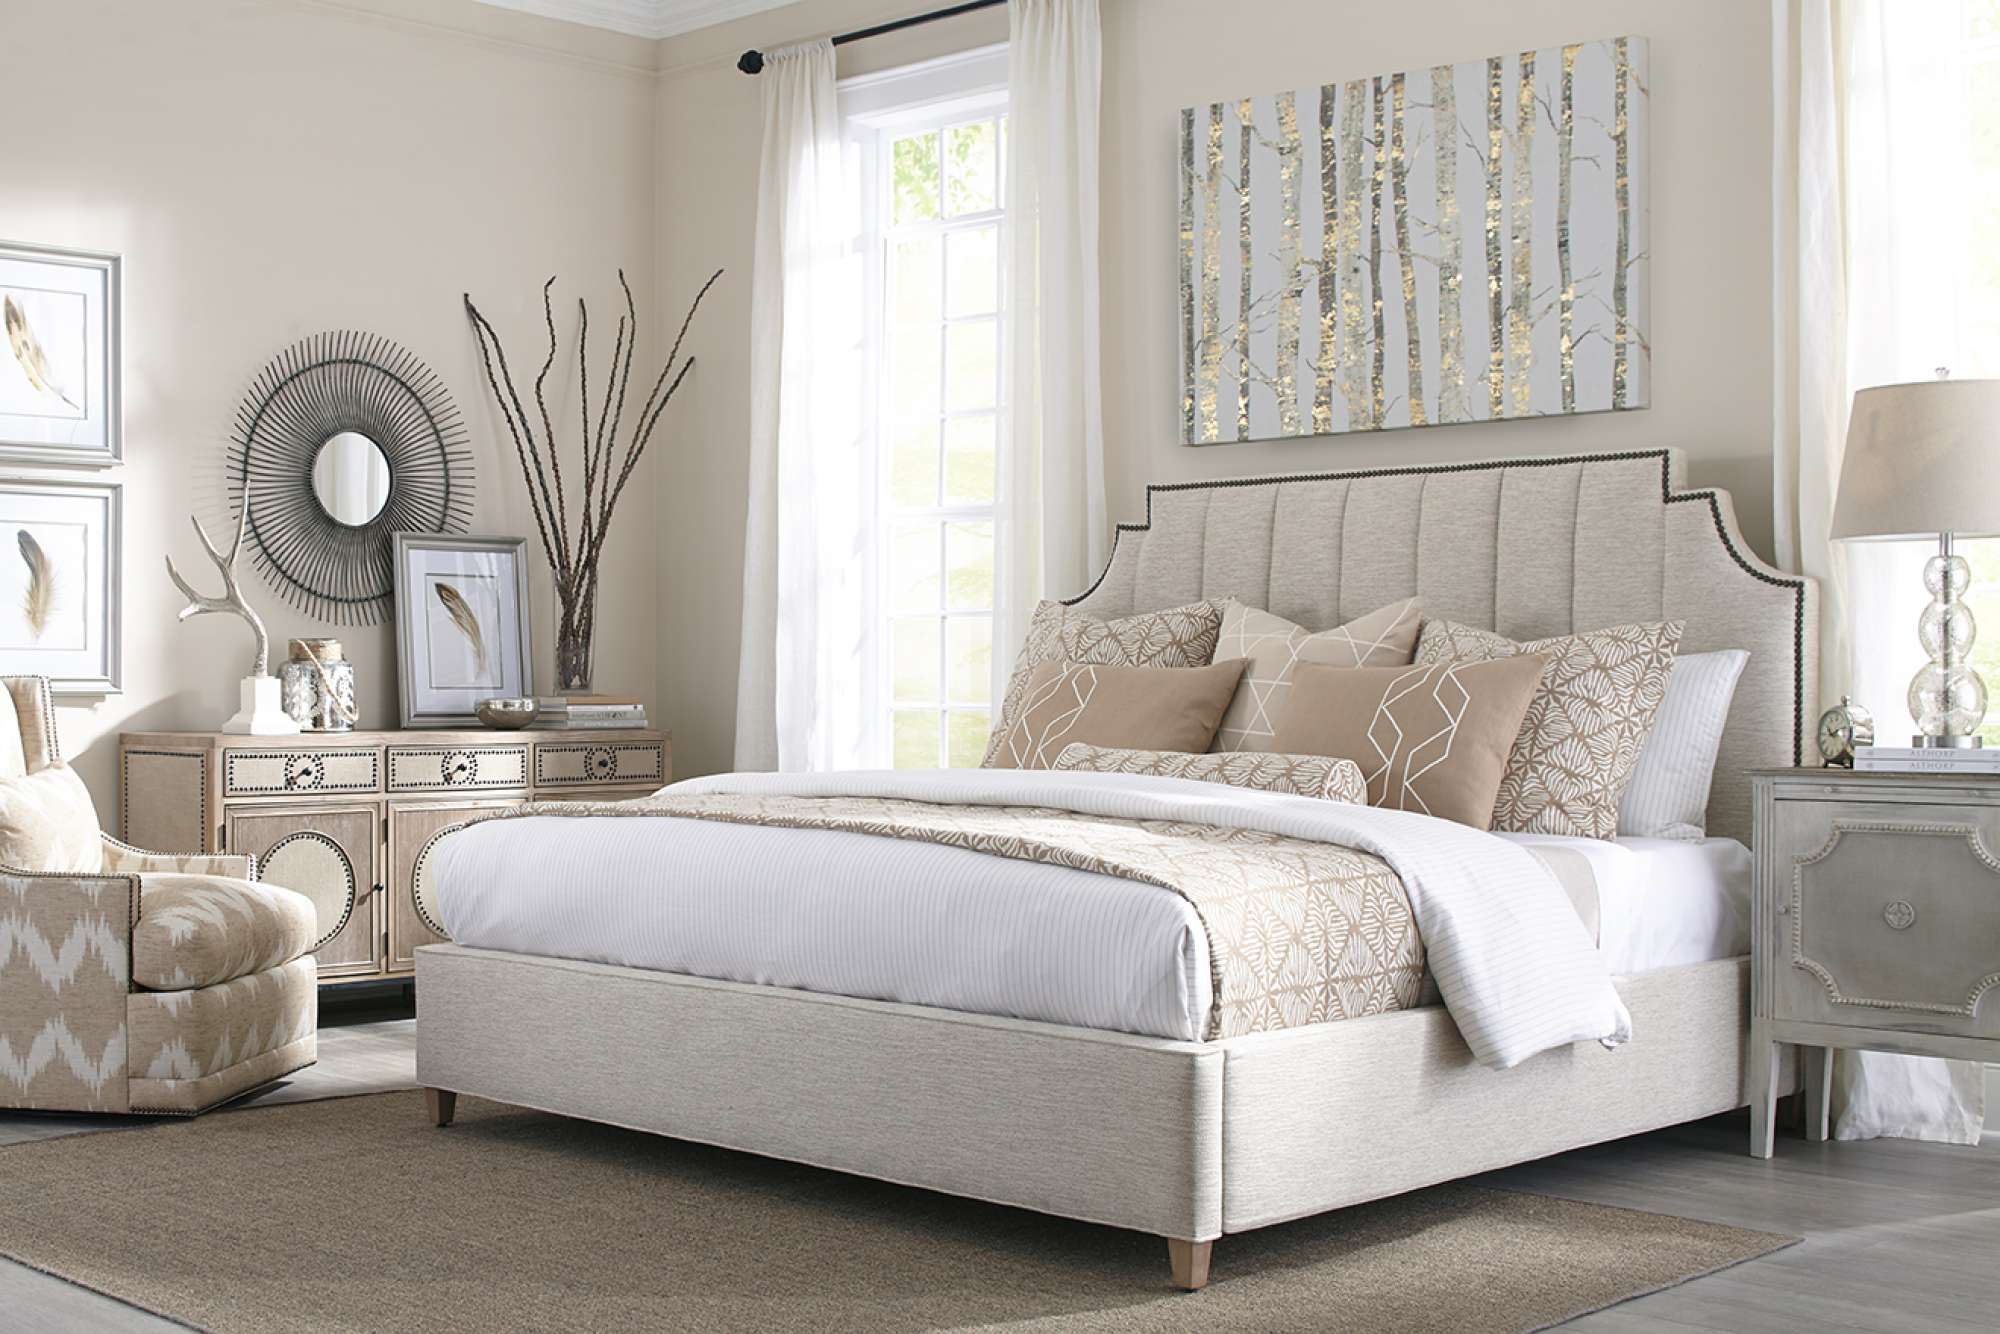 Rowe Bed and Headboard design